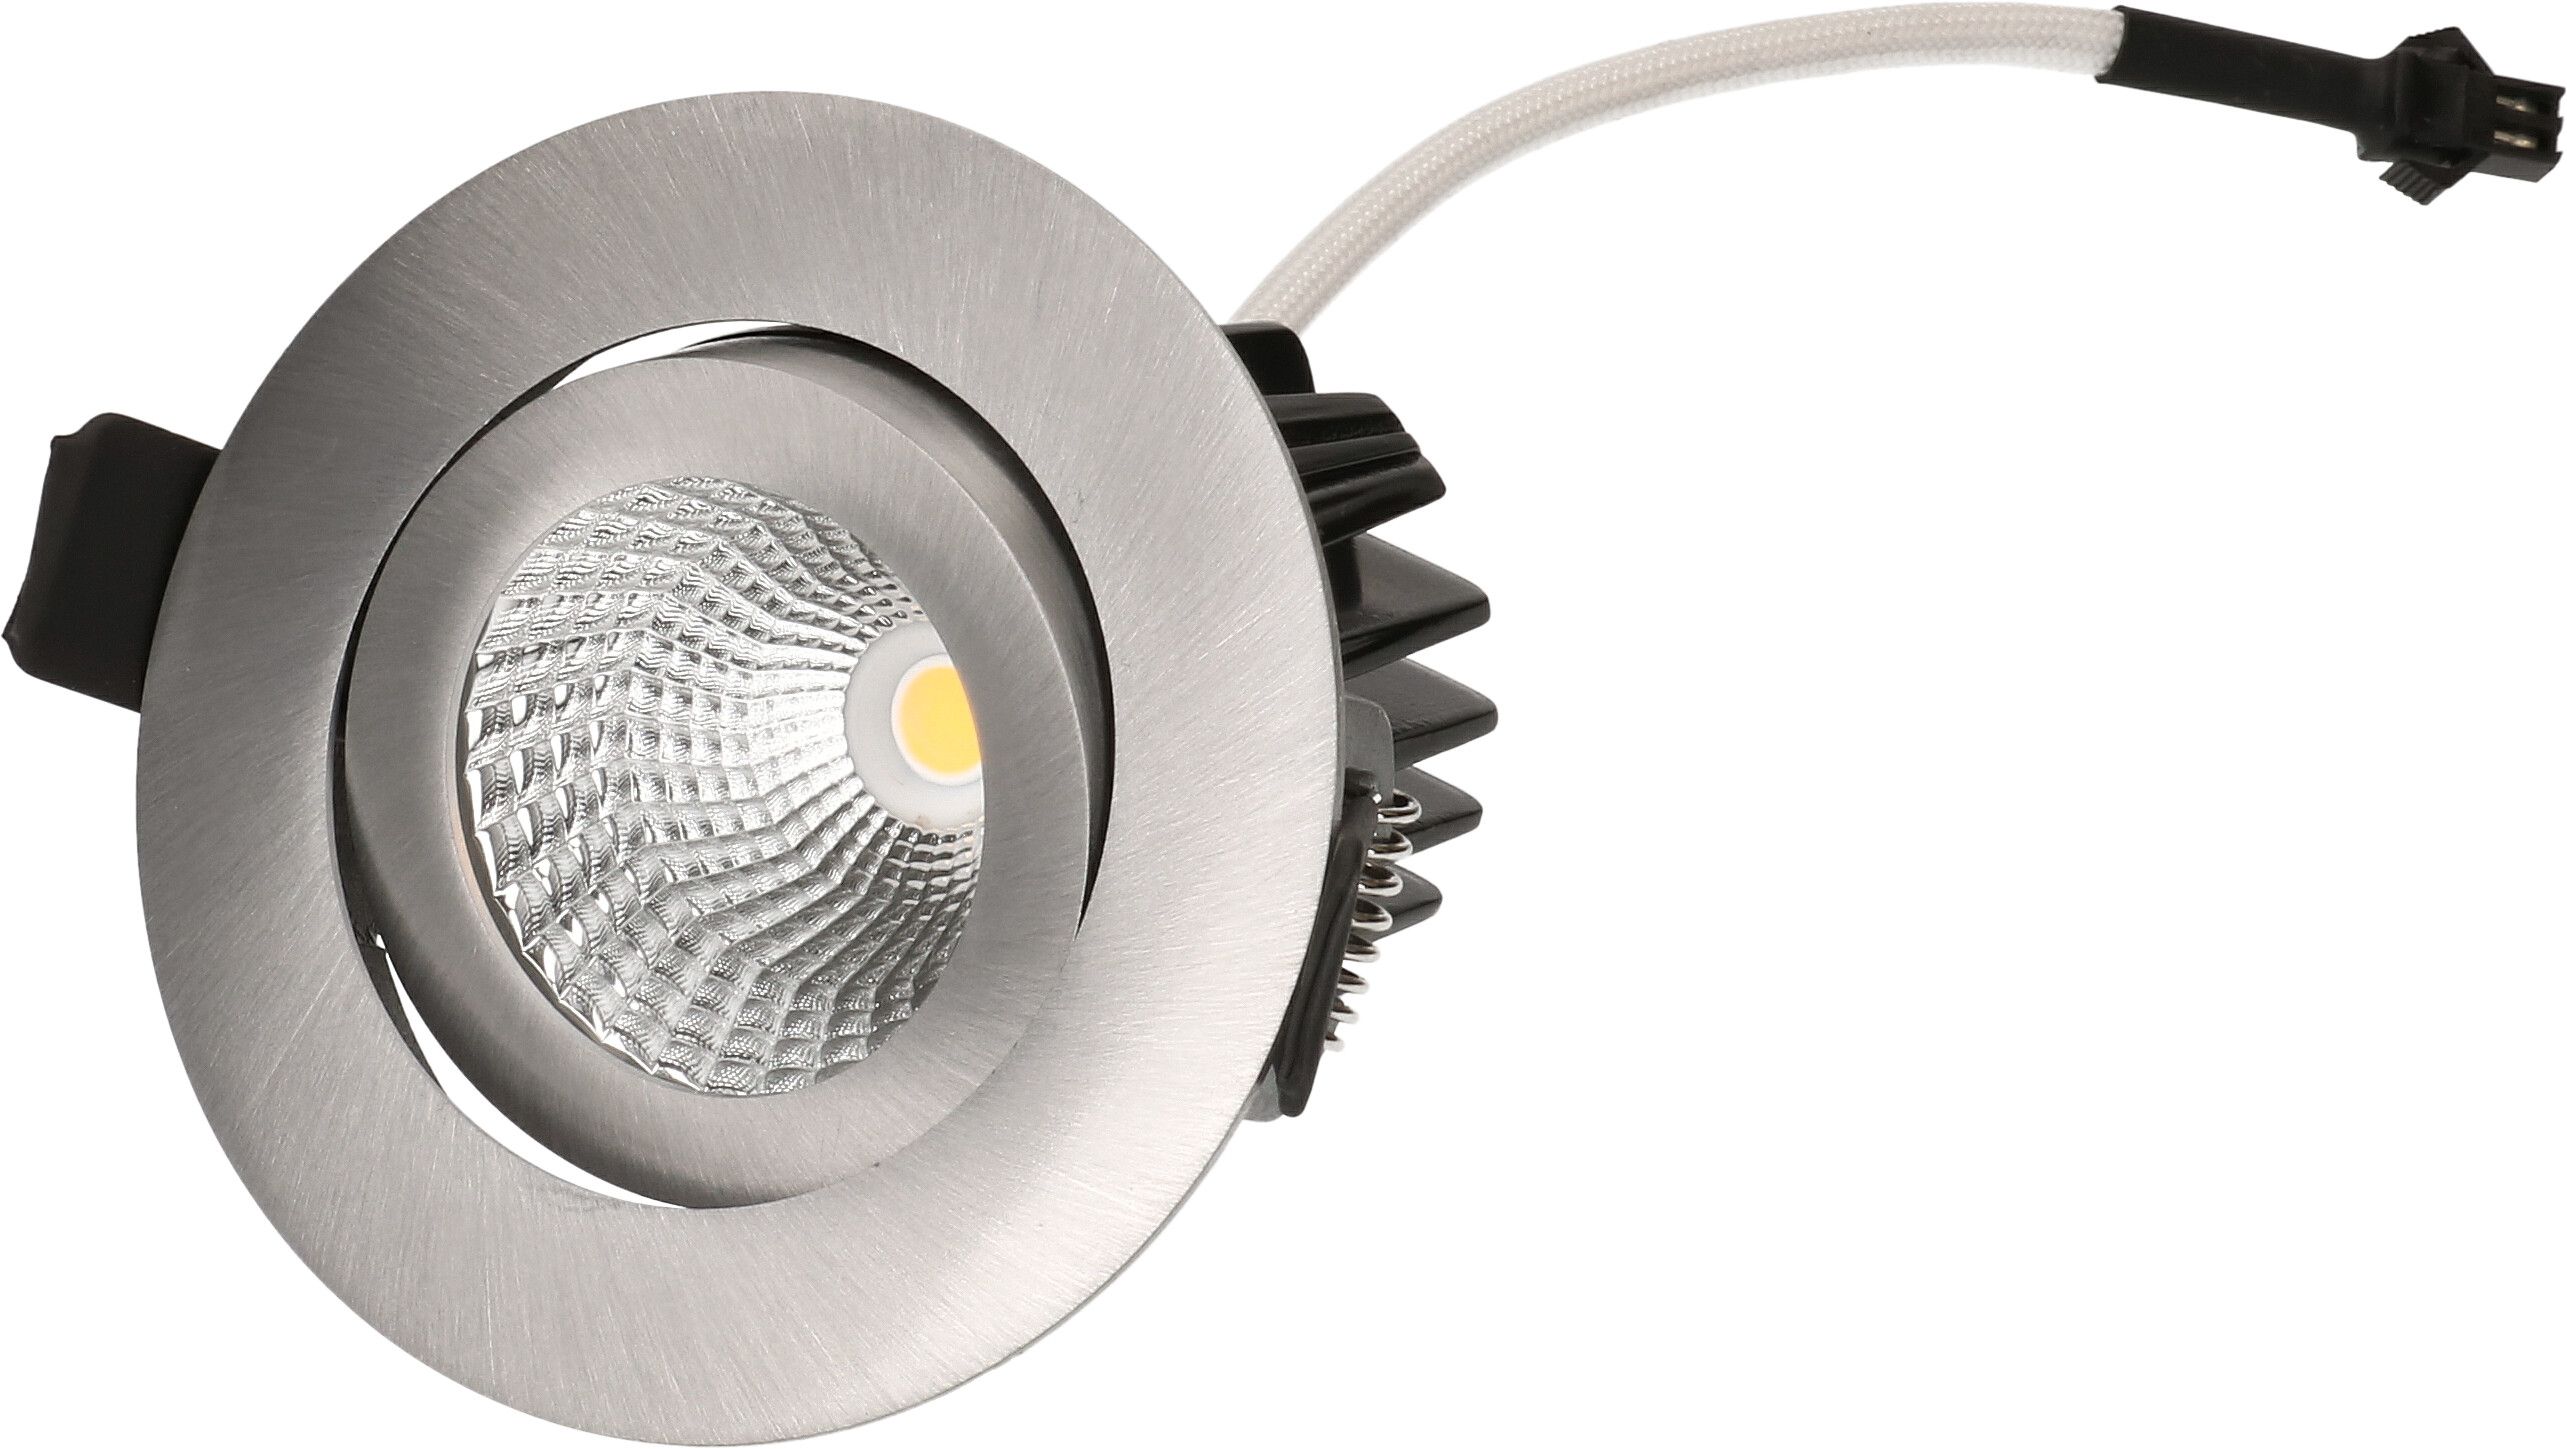 Downlight "small" Alu brushed 3000K 600lm 36°